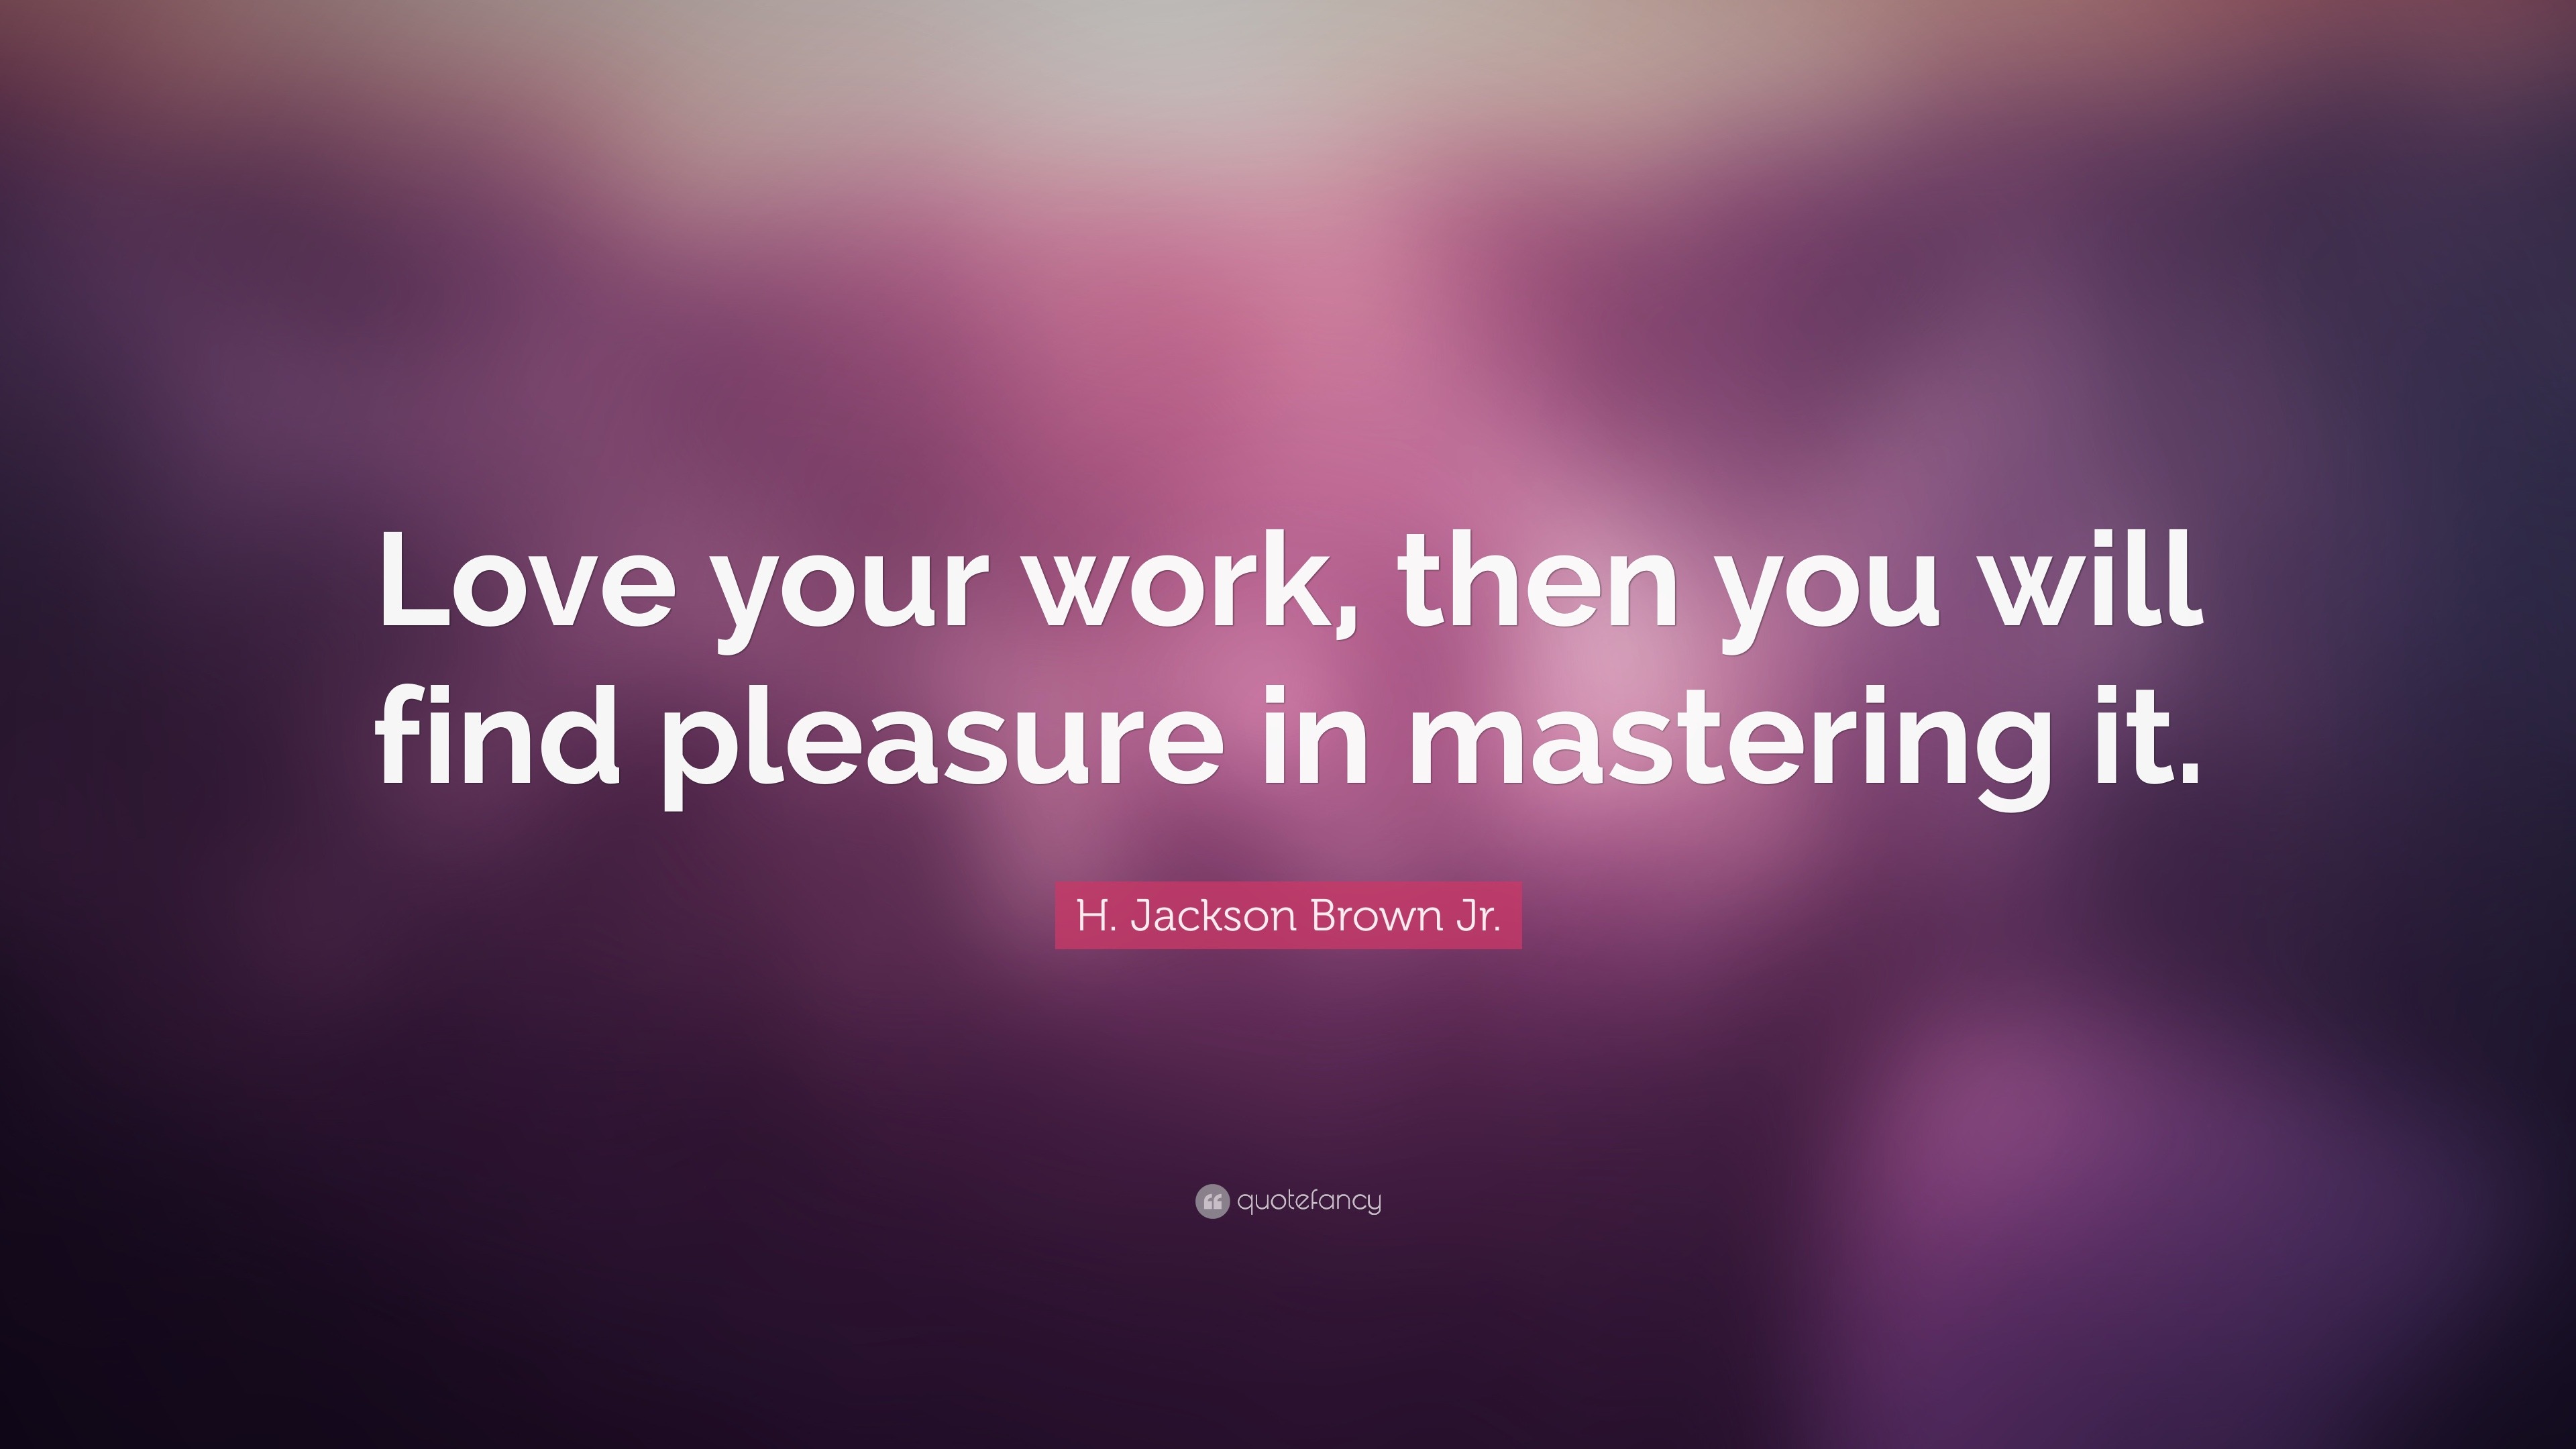 H Jackson Brown Jr Quote “Love your work then you will